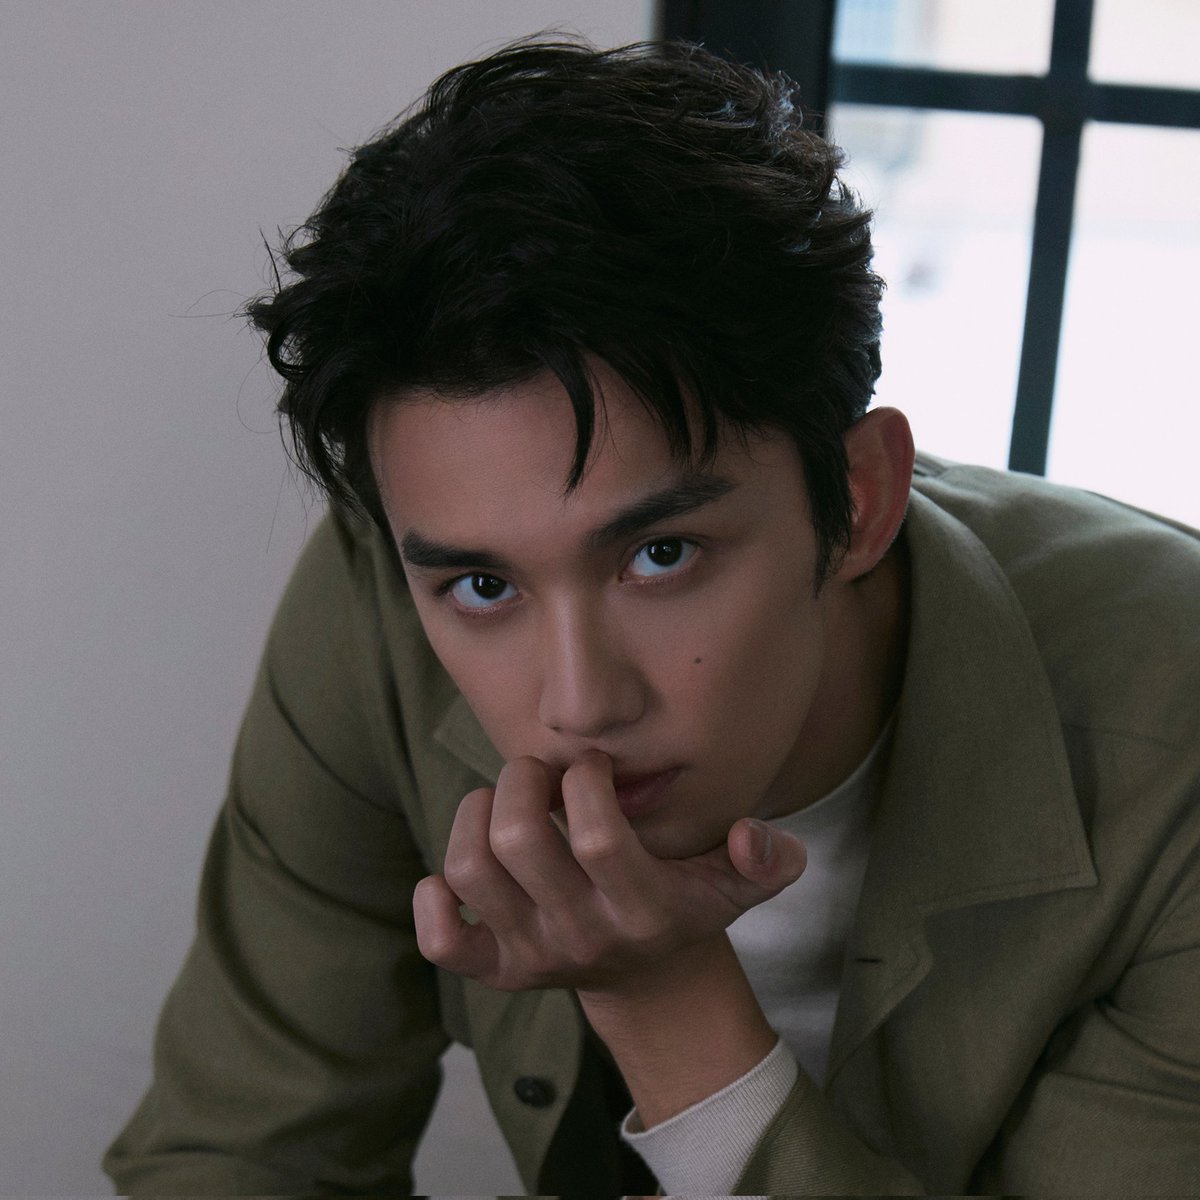 #NewProfilePic

Would you dare challenge #WuLei in a staring contest? 😅